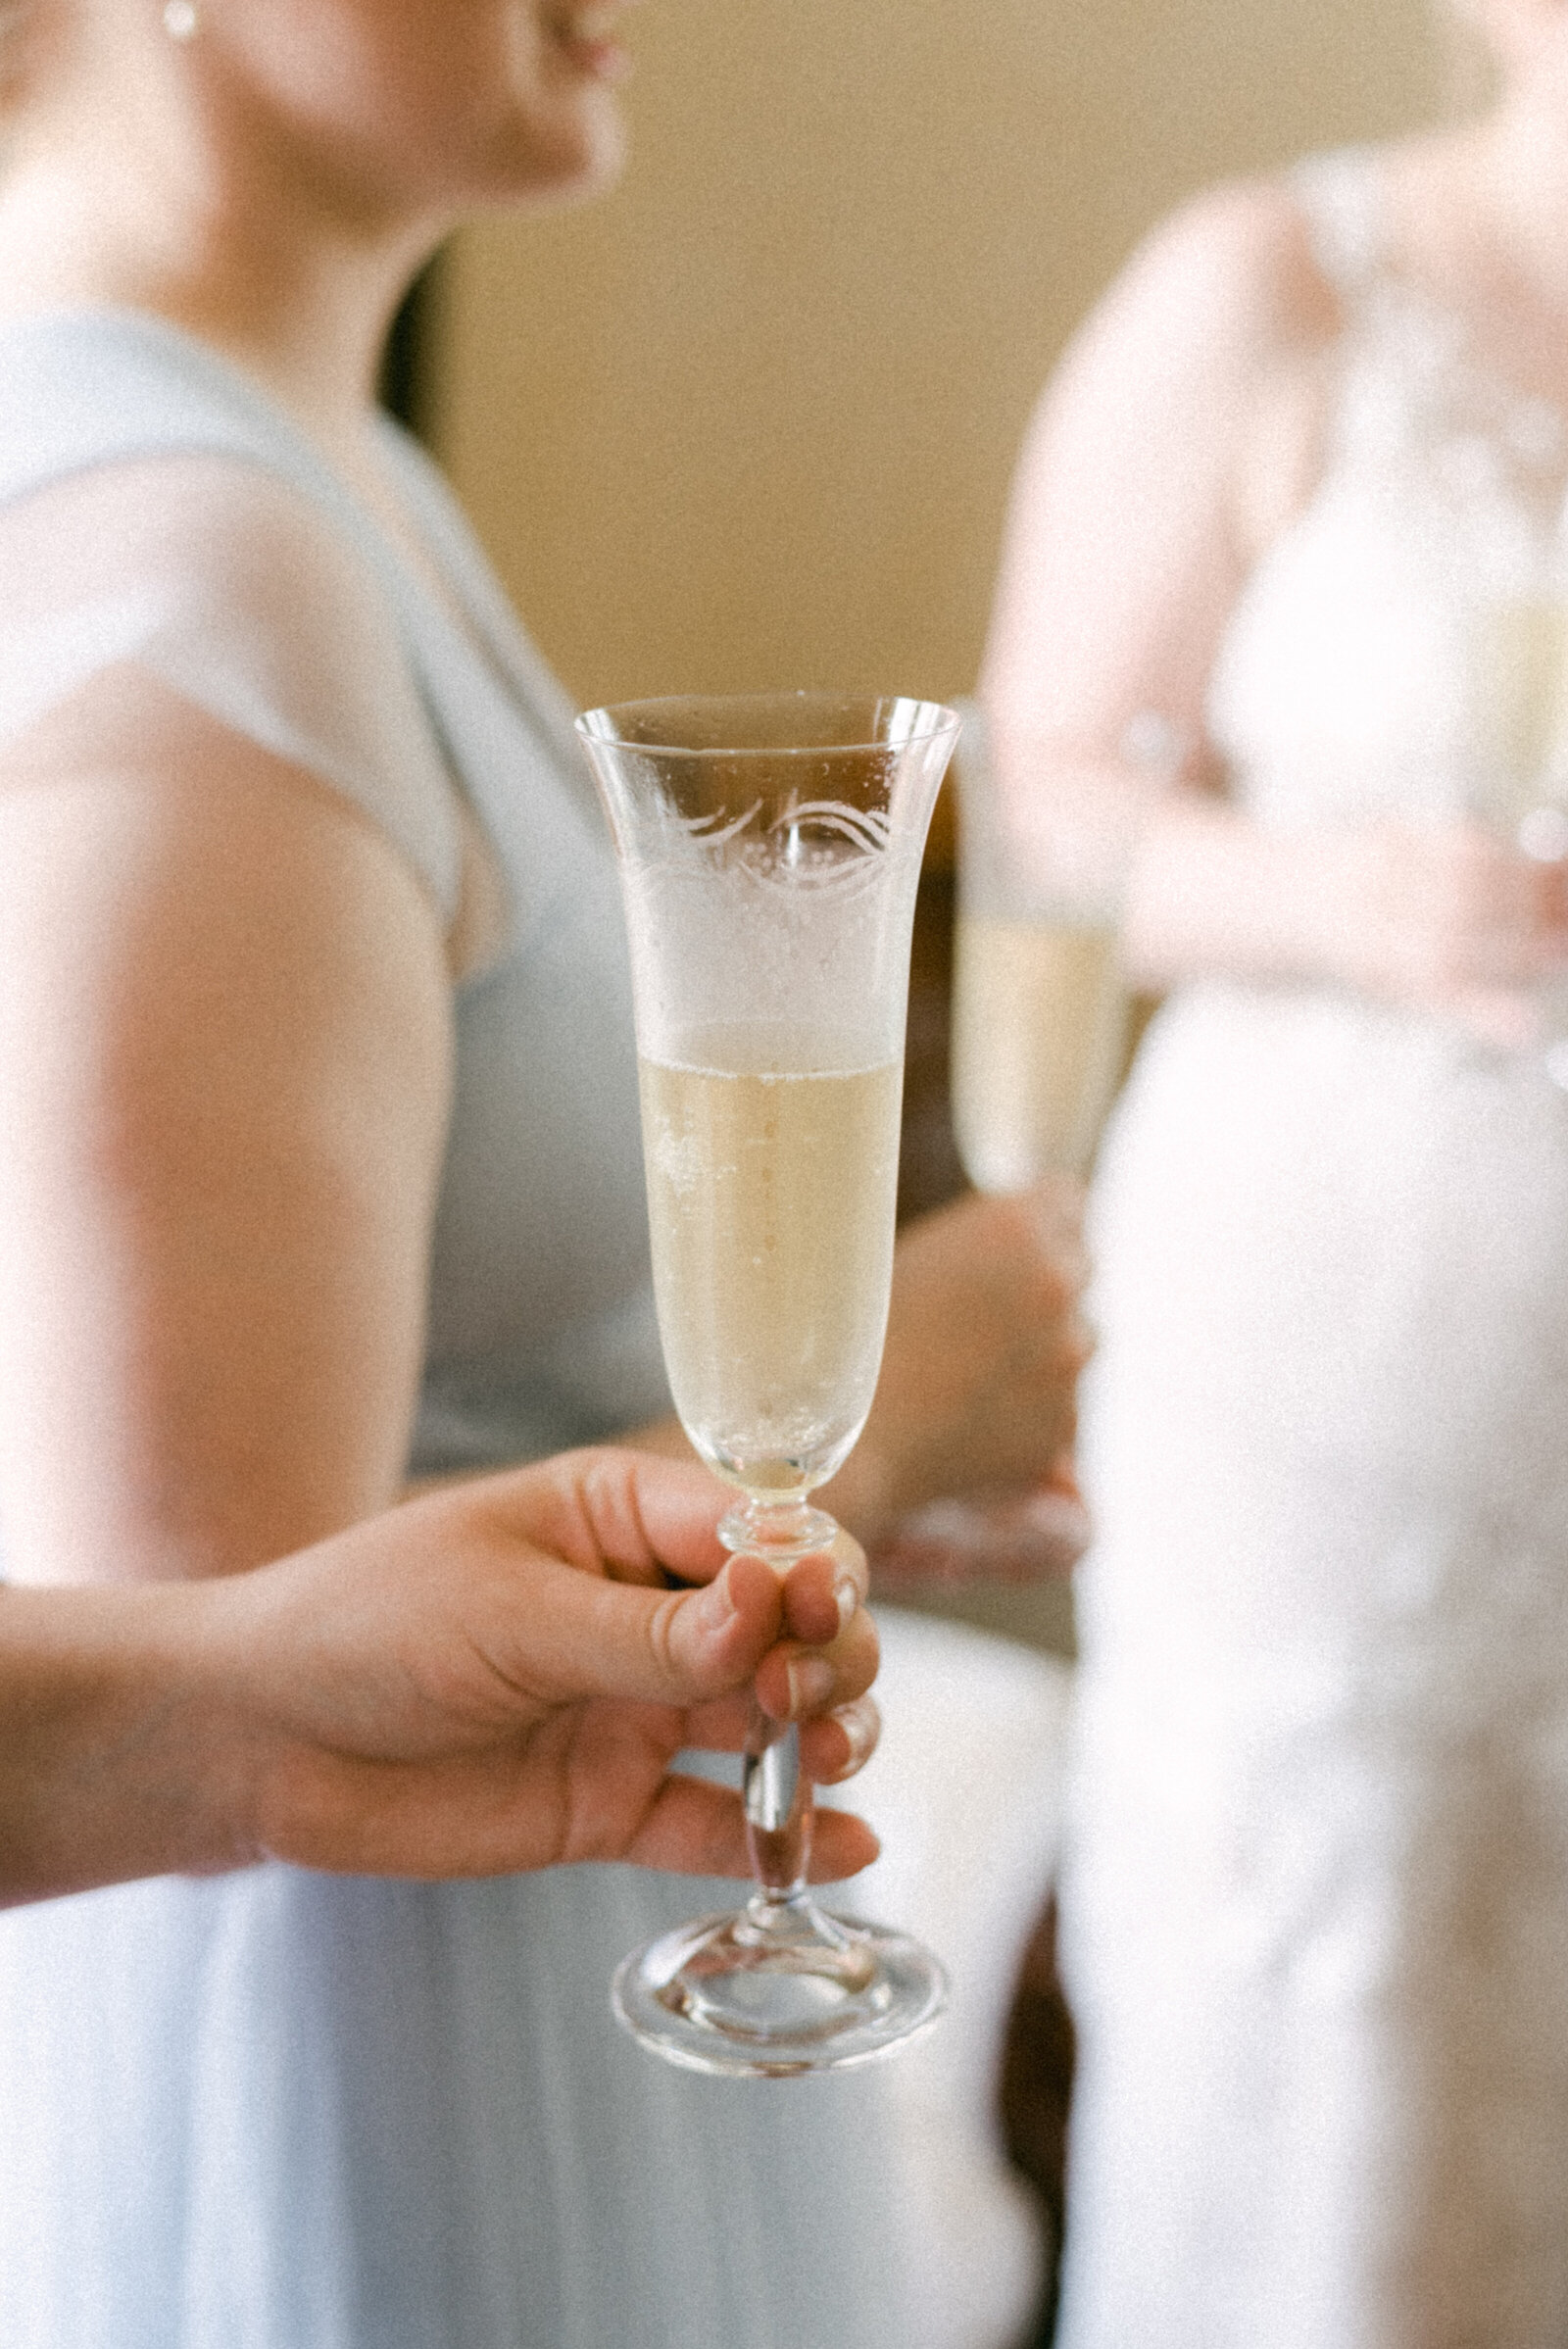 A champagne glass in an image photographed by wedding photographer Hannika Gabrielsson.